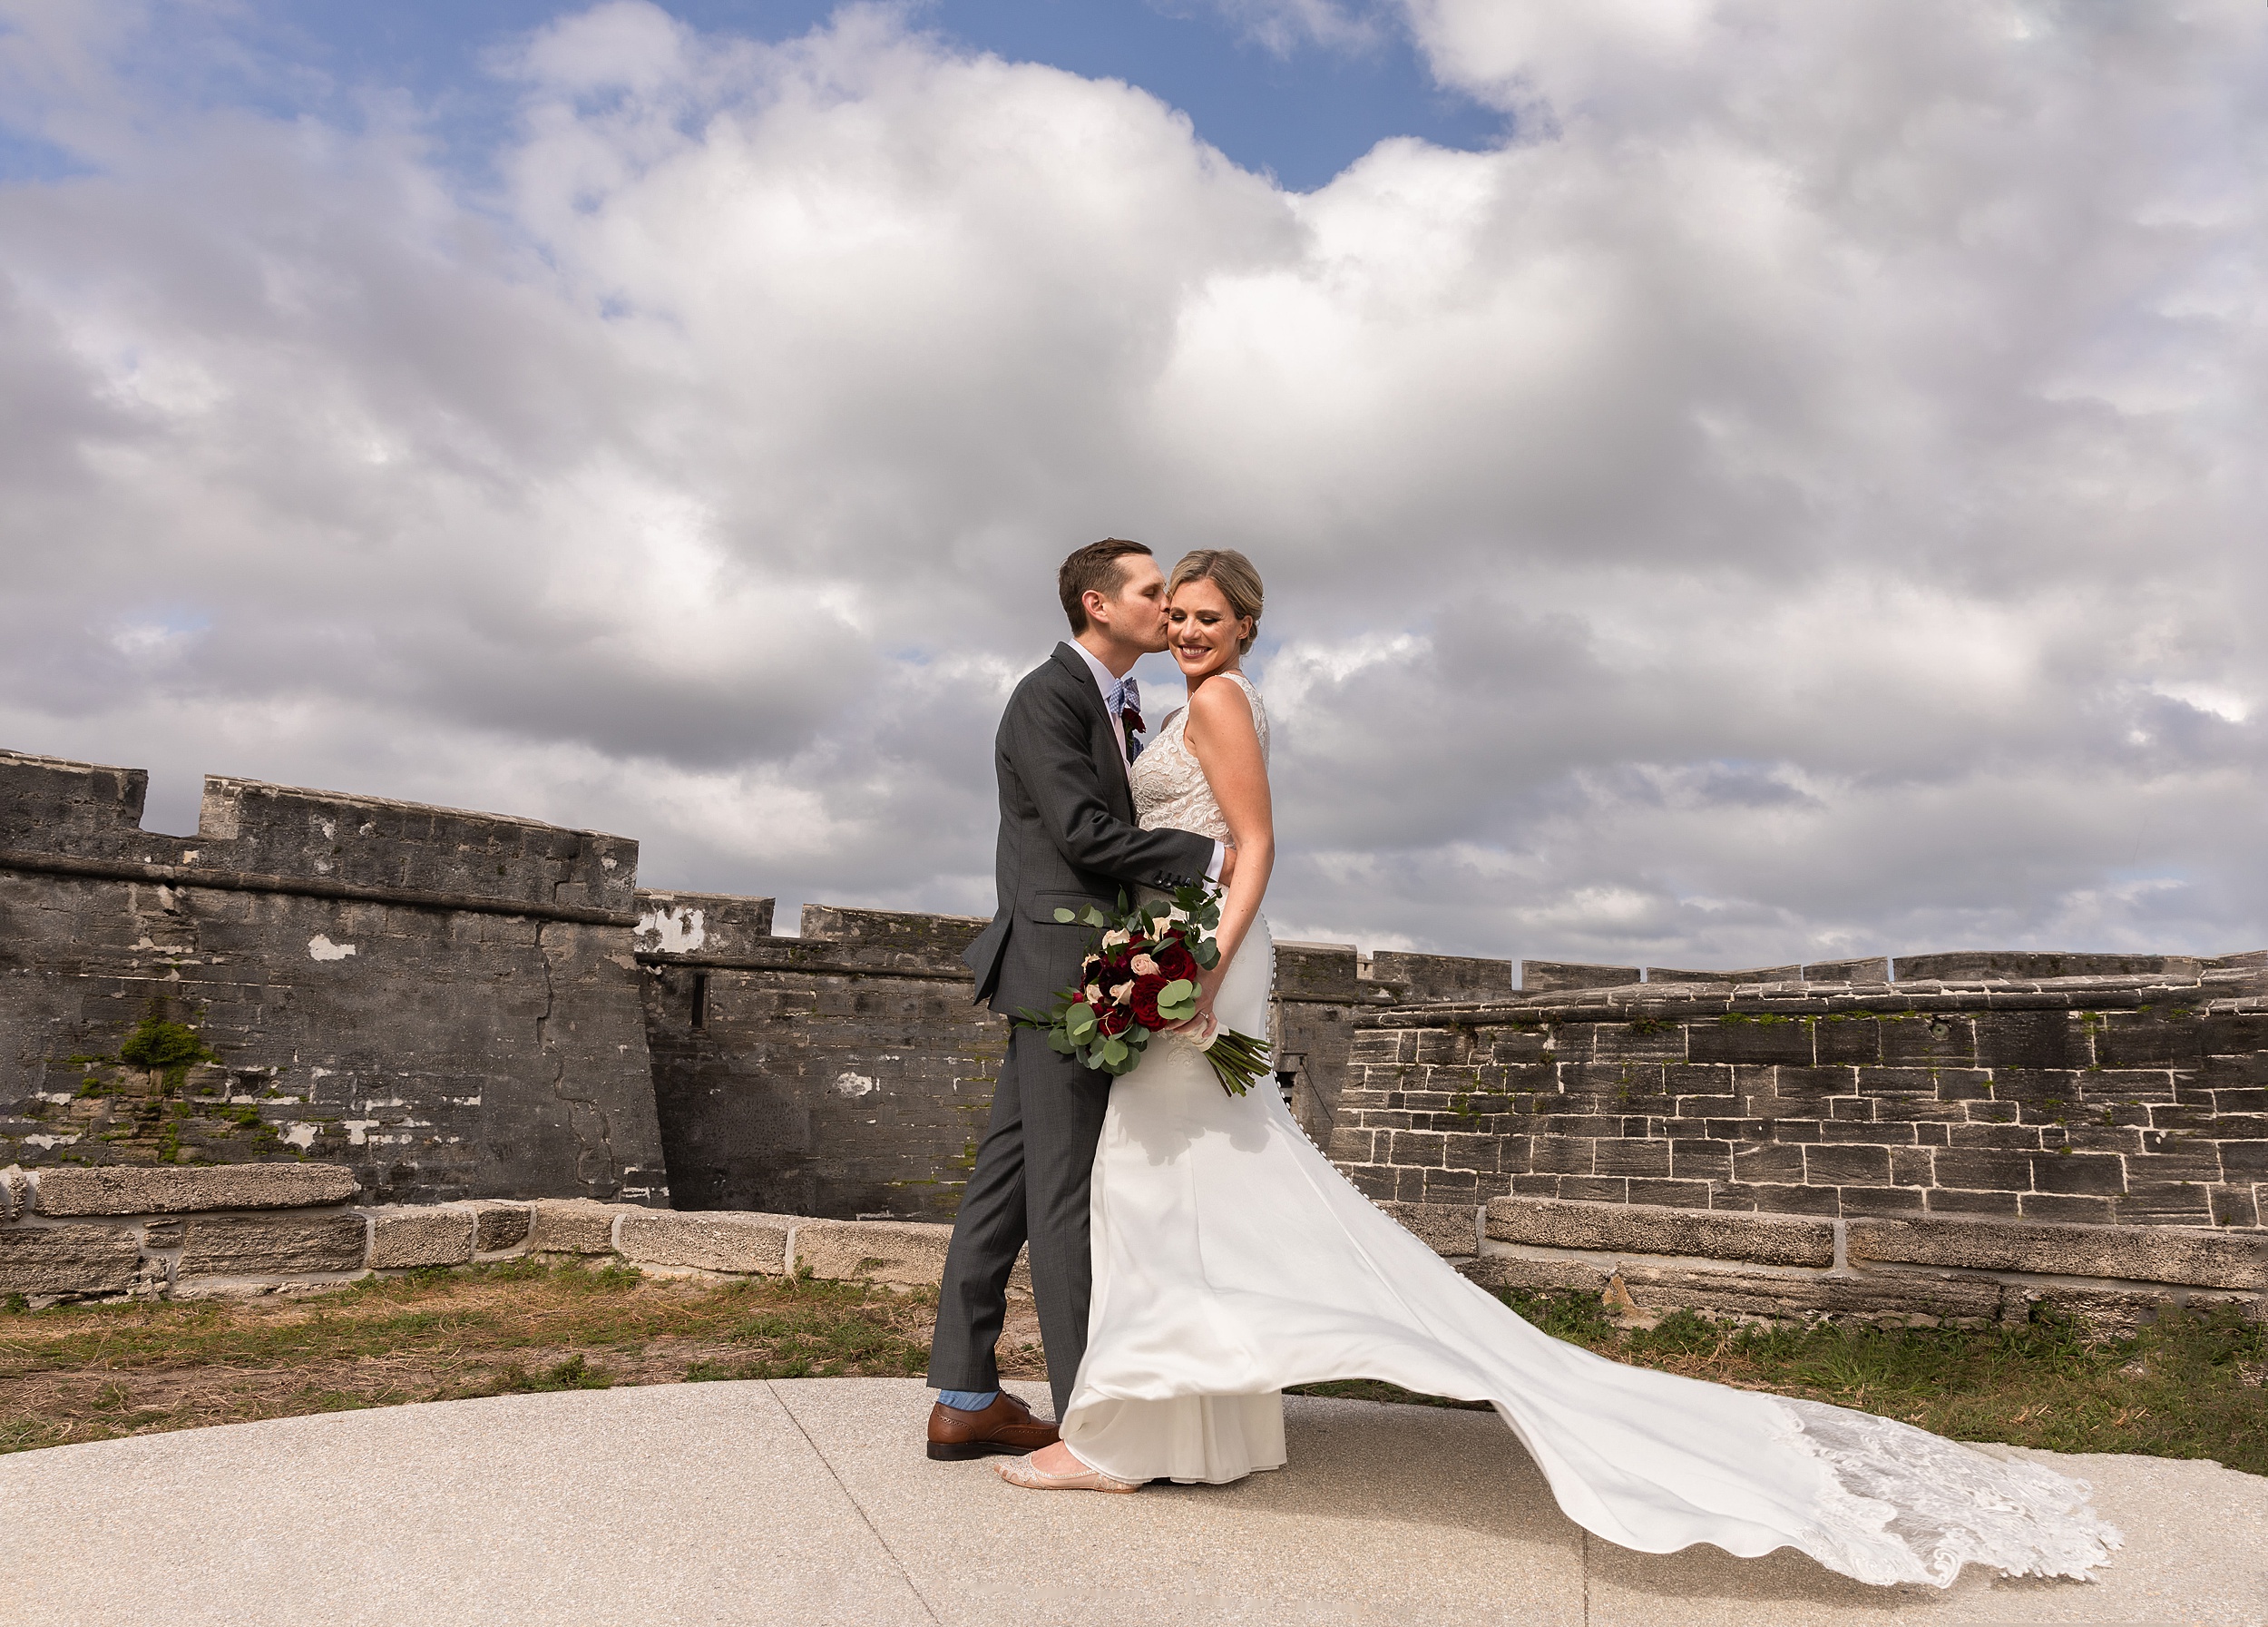 Newlyweds kiss and stand on a patio by historical walls